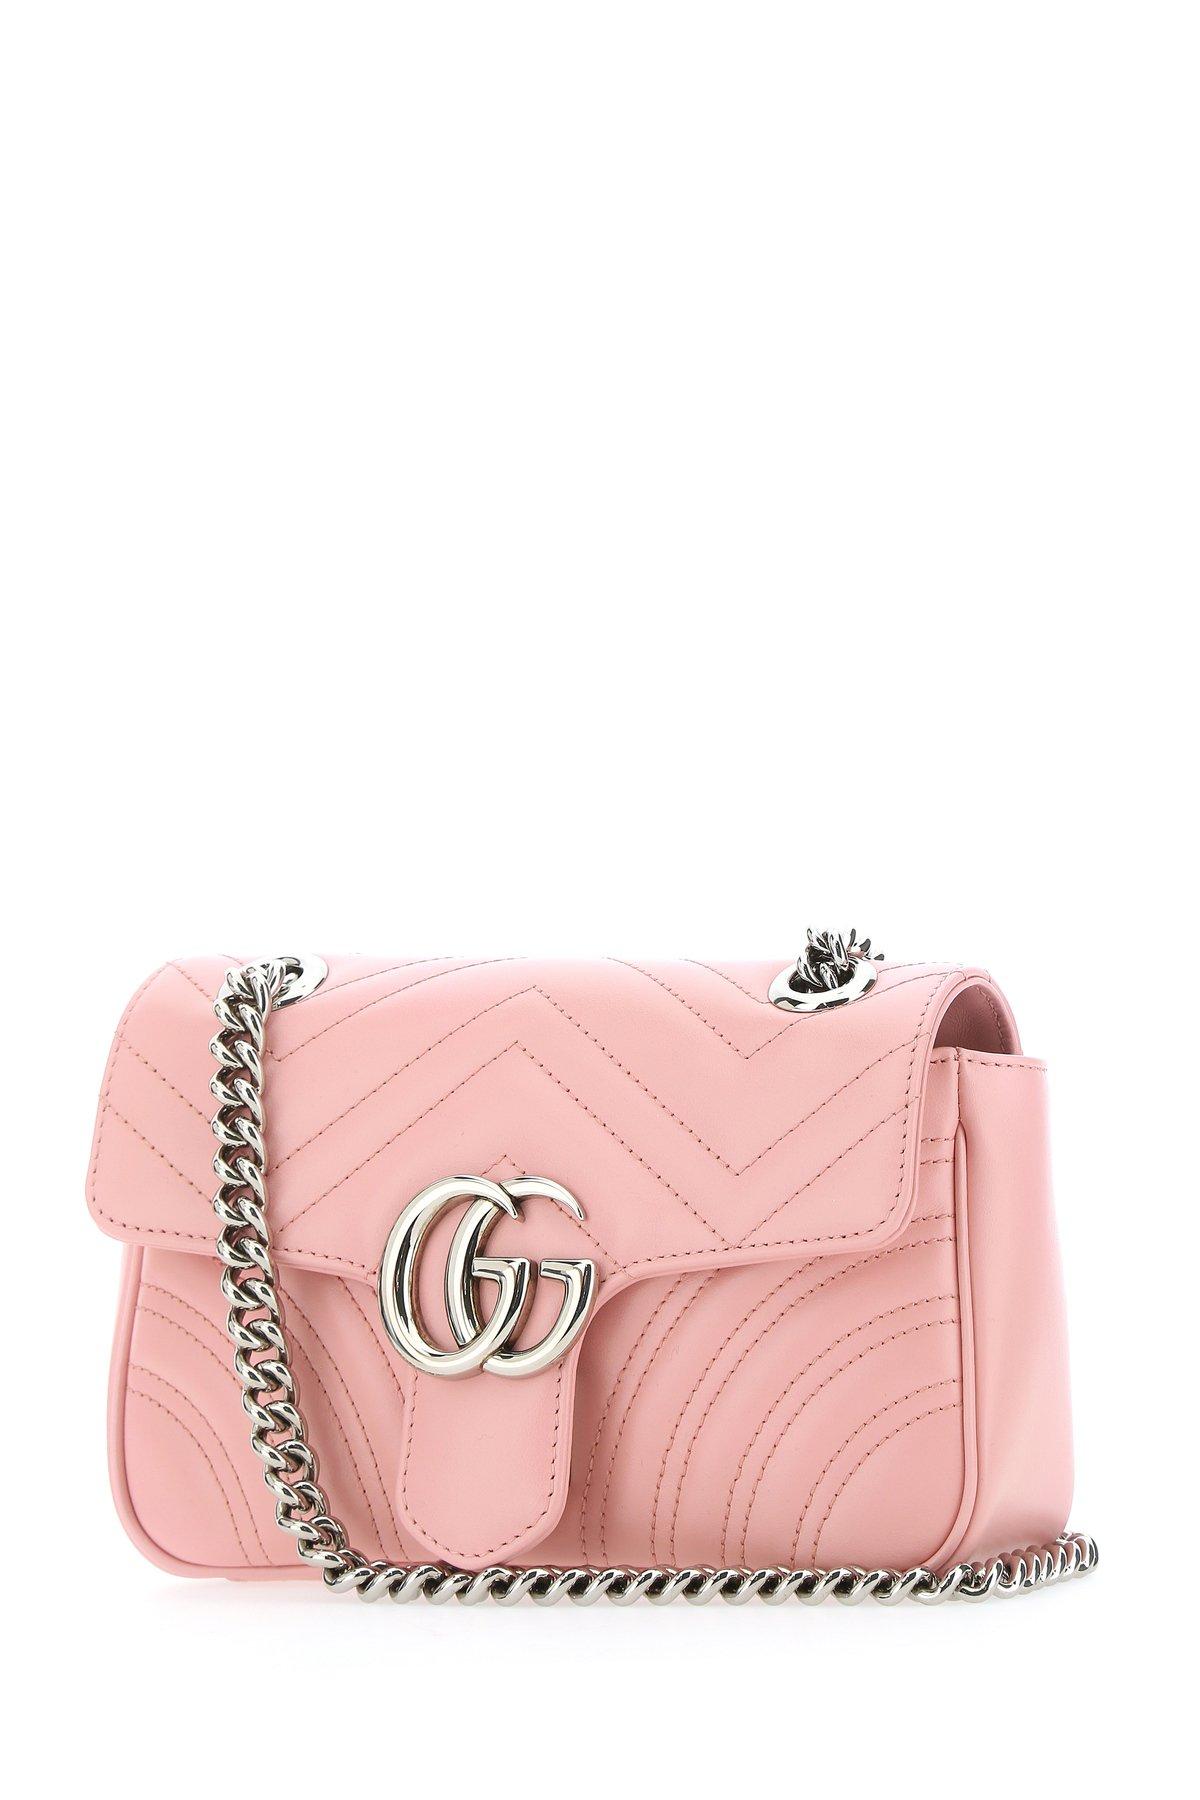 Gucci GG Marmont Small Matelasse Leather Shoulder Bag in Pink - Save 16% -  Lyst